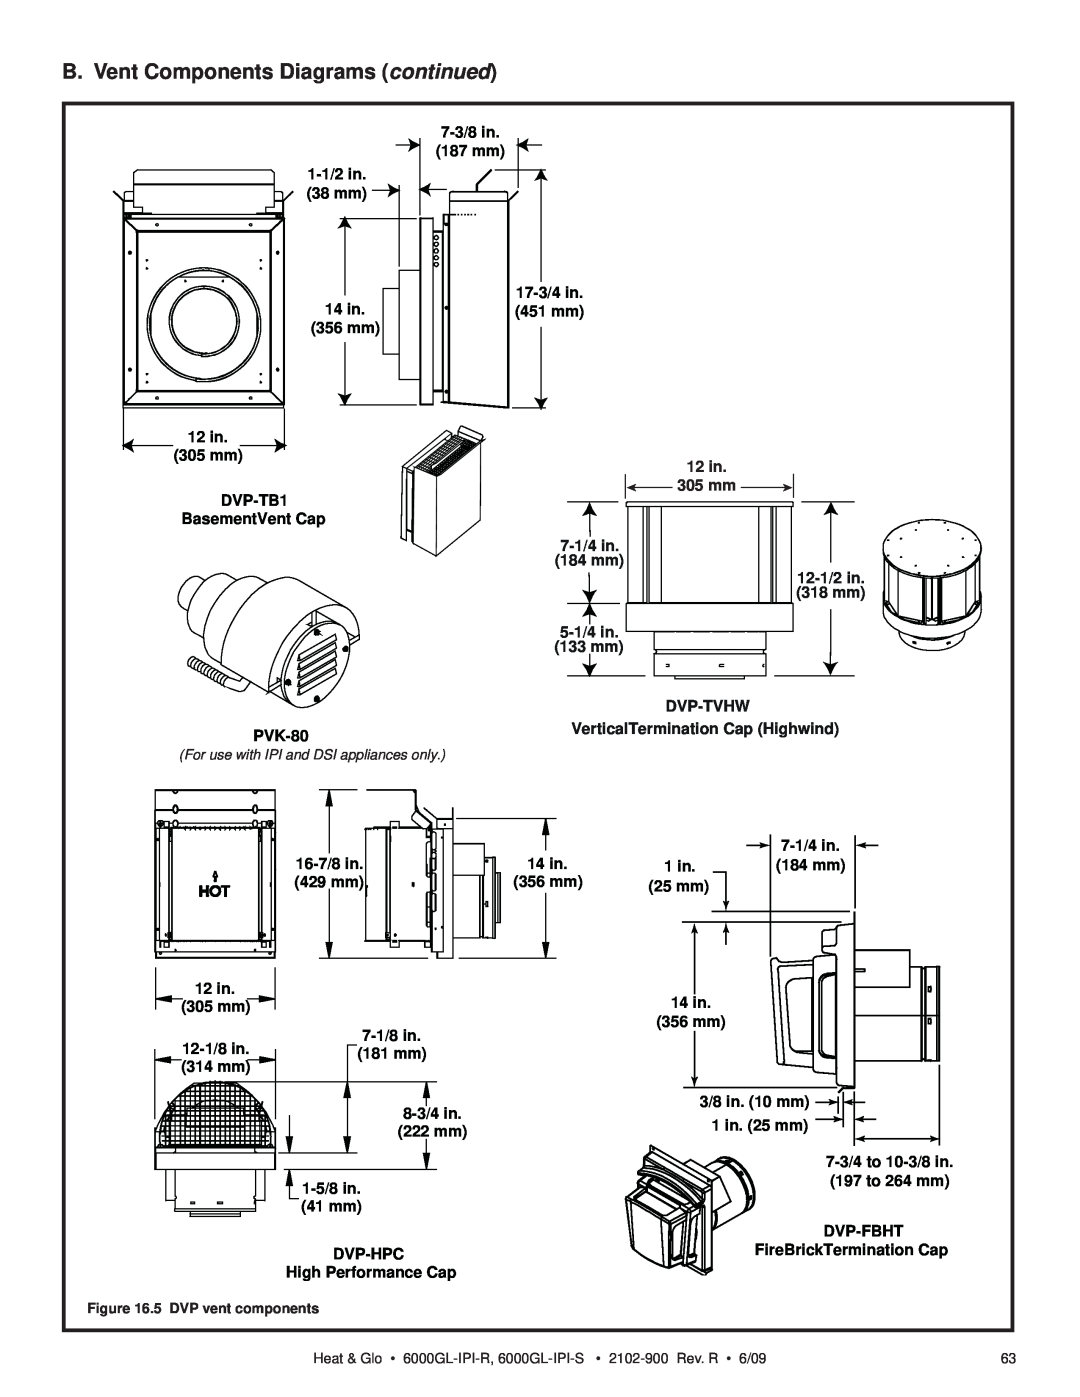 Heat & Glo LifeStyle 6000GL-IPI-R B. Vent Components Diagrams continued, 12 in, 7-1/4in, 12-1/2in, 318 mm, 5-1/4in 